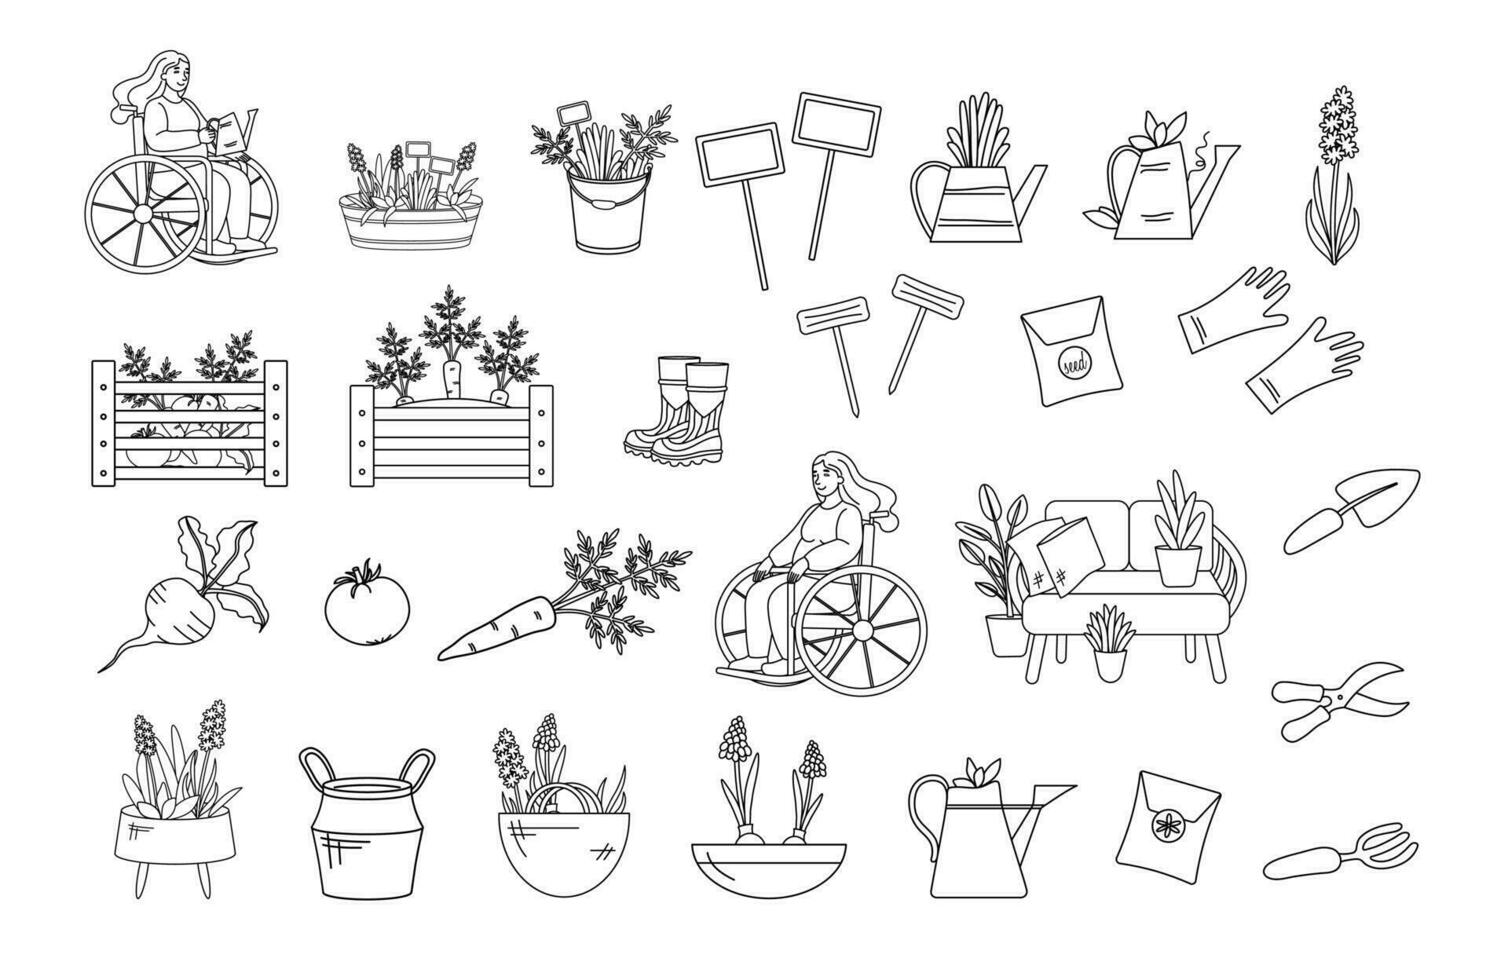 Cute gardening equipment - shovel, pitchfork, garden shears, plants, watering cans,  rattan sofa, vegetables and seeds. A woman in a wheelchair is gardening. Gardening outline vector set.